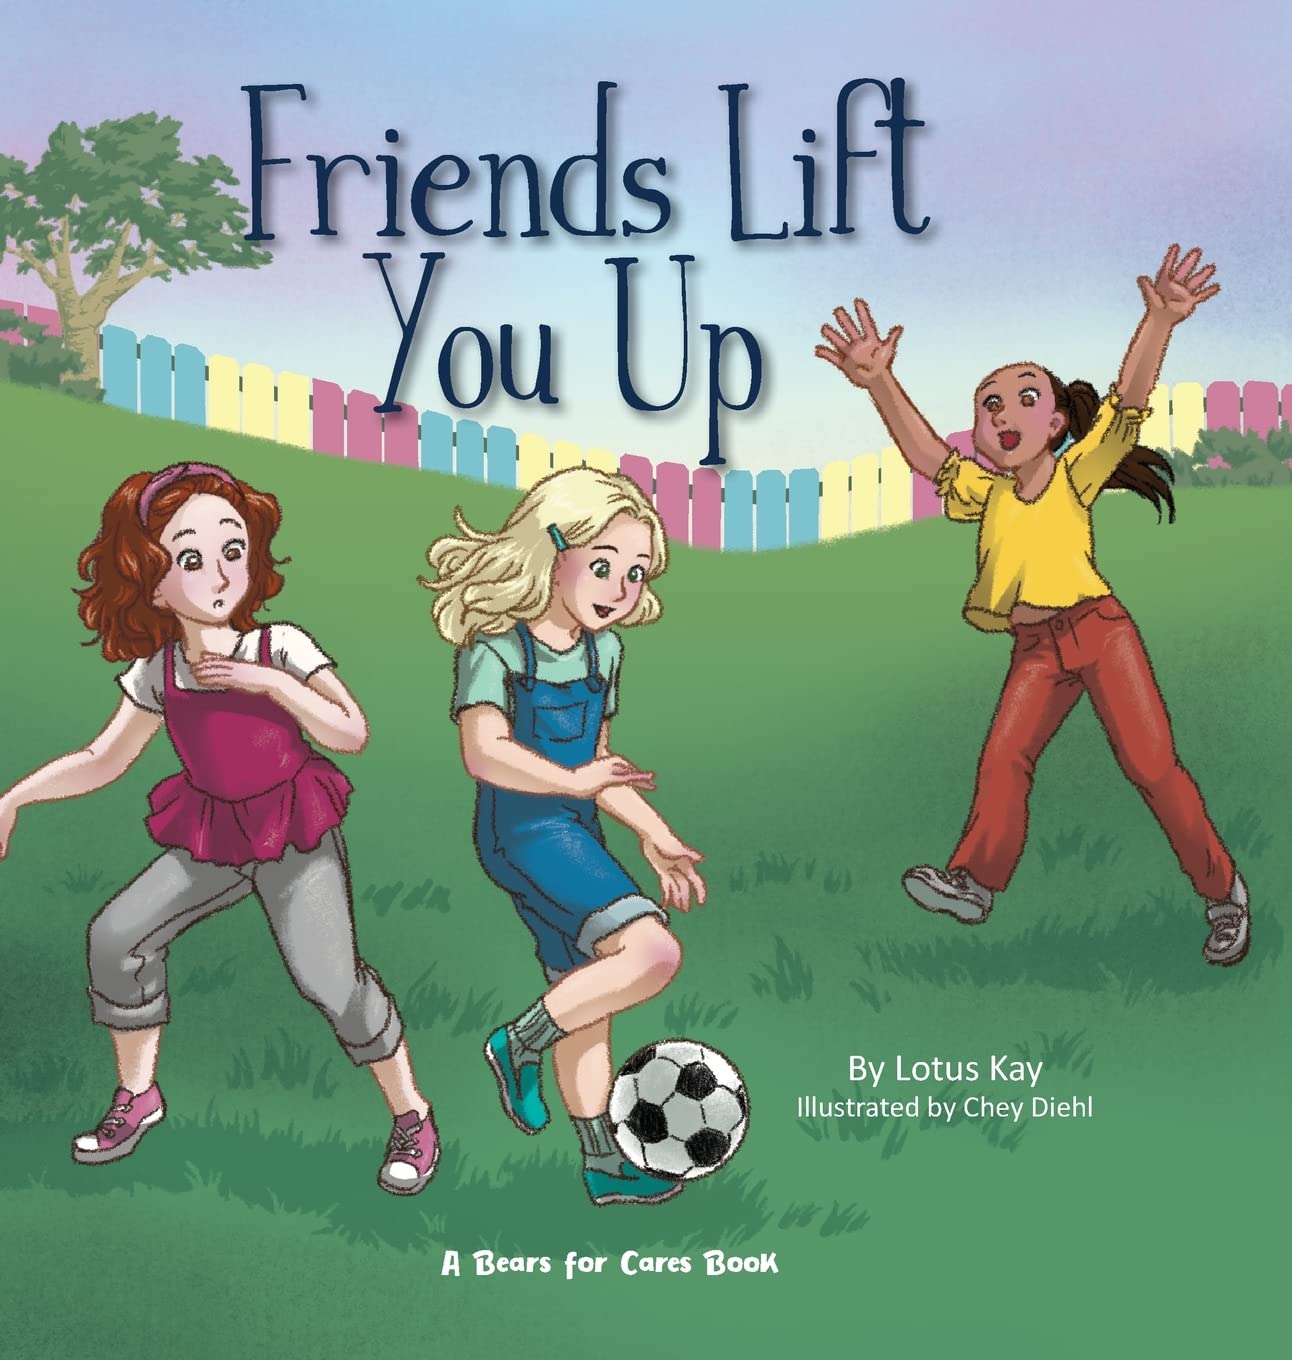 A Bears for Cares Book That Helps Kids ‘Lift’ Each Other Up and Prevent ...